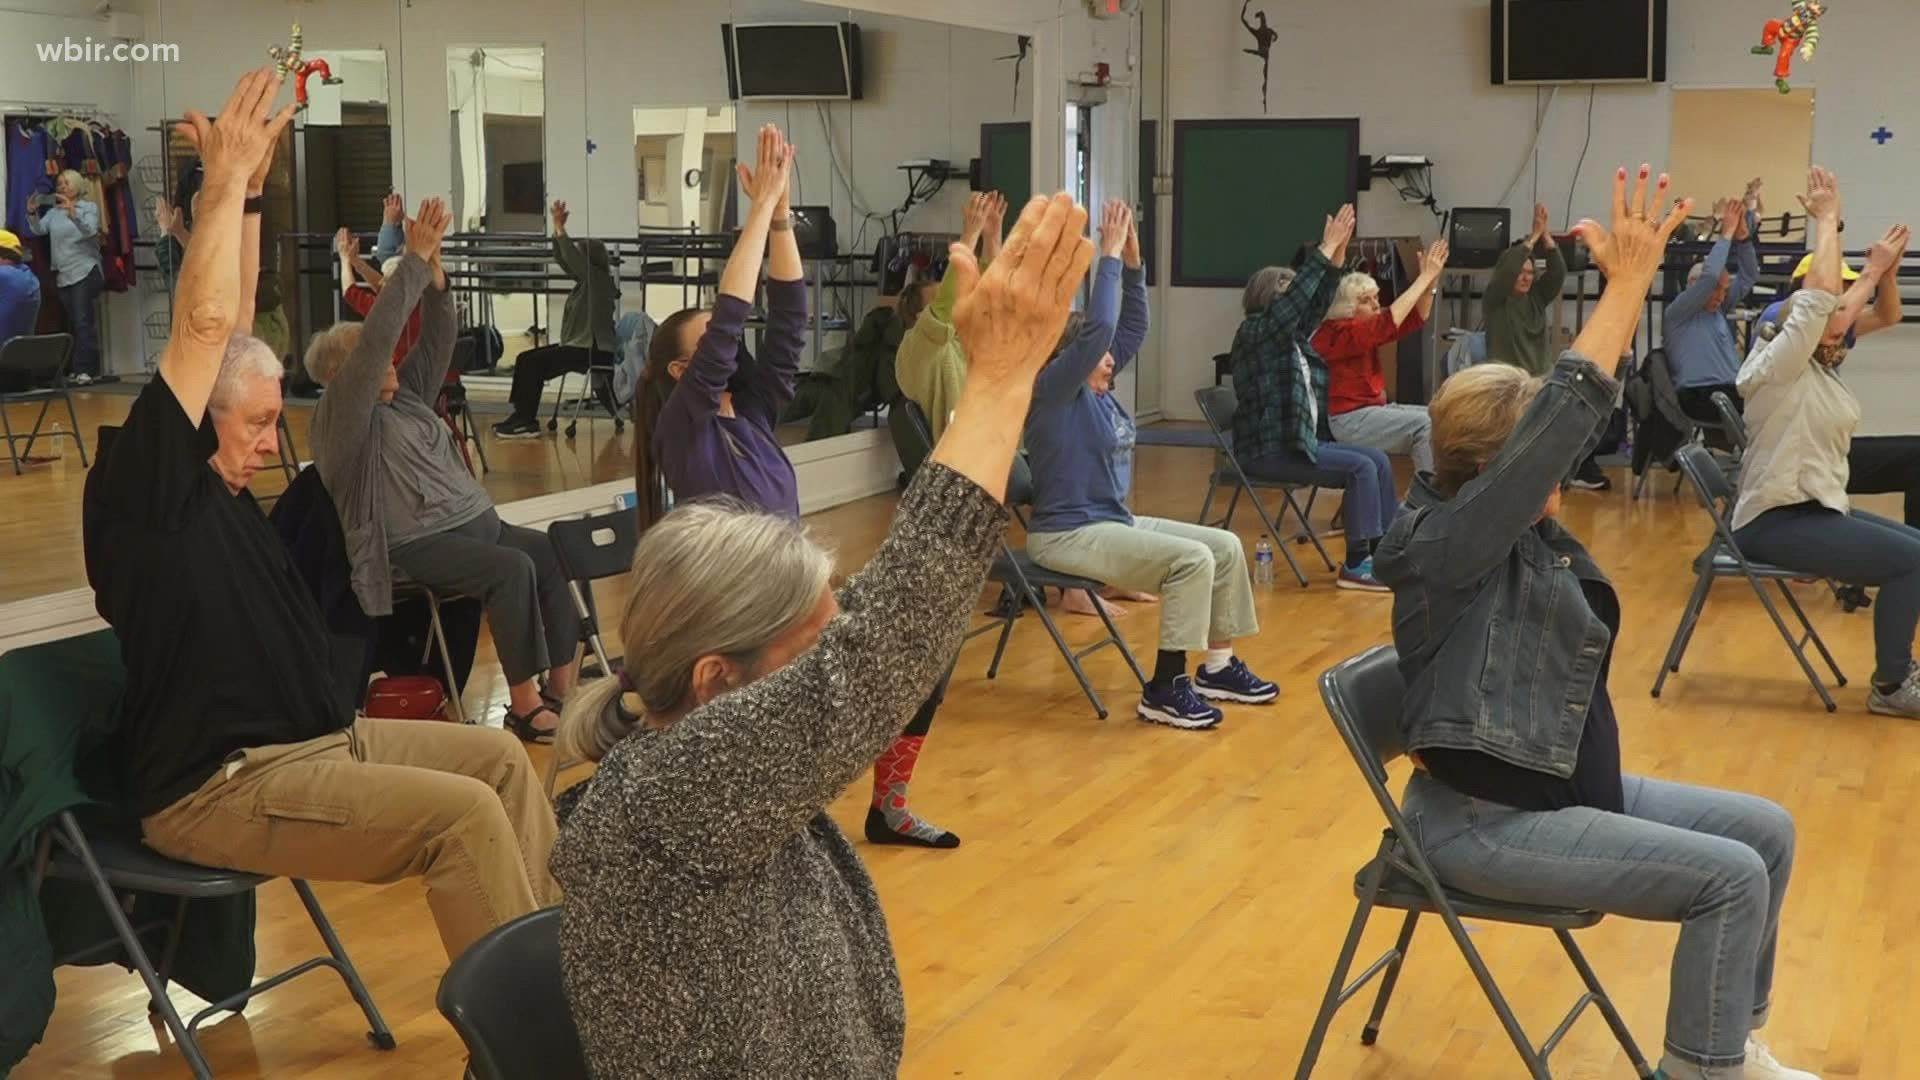 If you're living with Parkinson's disease or any other mobility issue, you can now take free dance classes right here in Knoxville thanks to PJ Parkinson's Support.